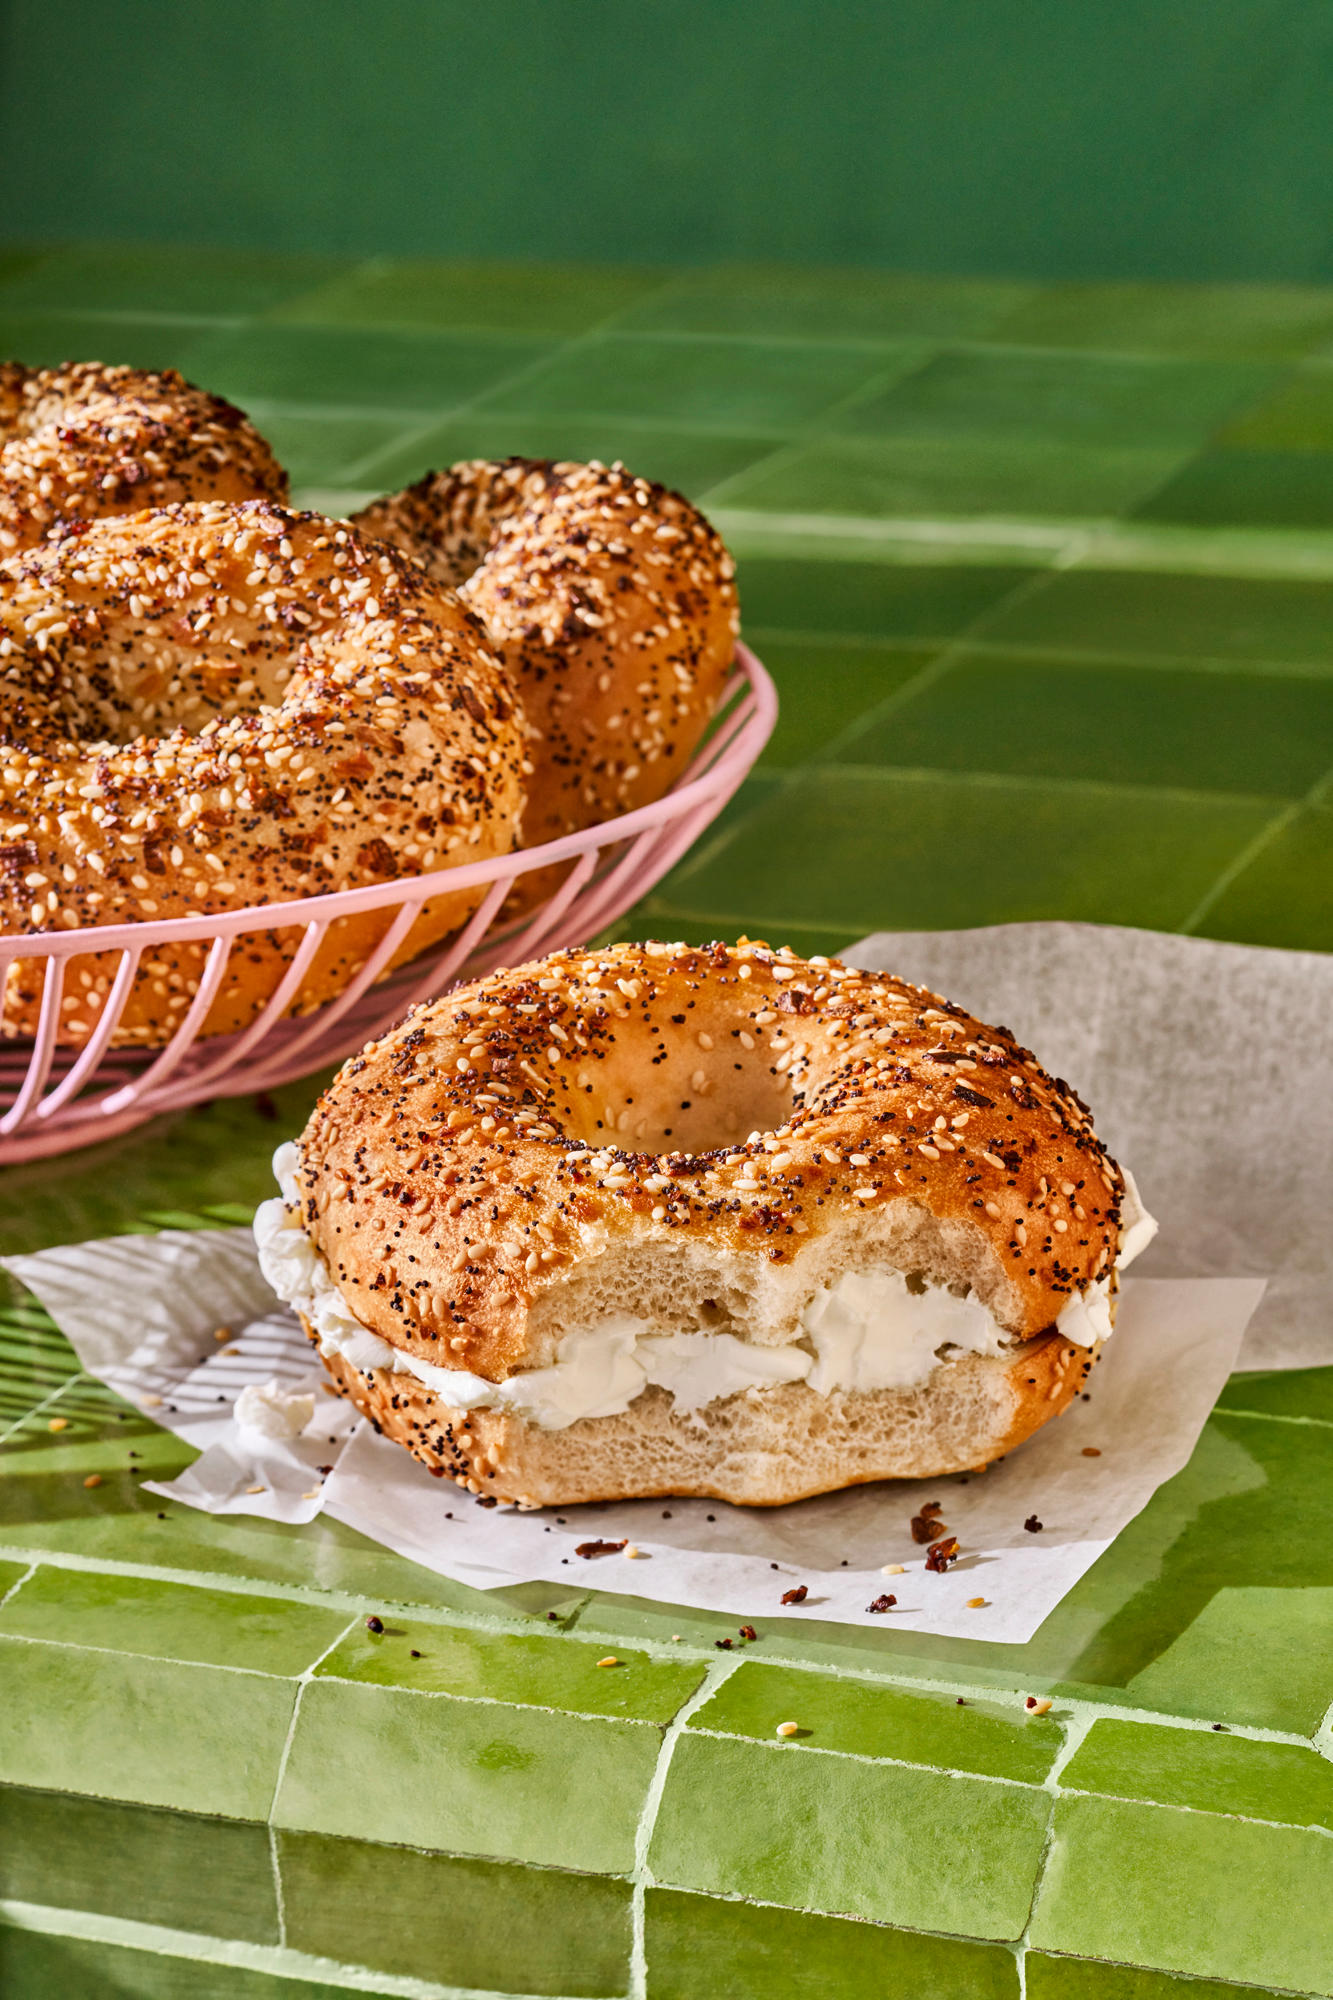 Everything Bagel with Plain Cream Cheese Panera Bread Miami (305)969-7018